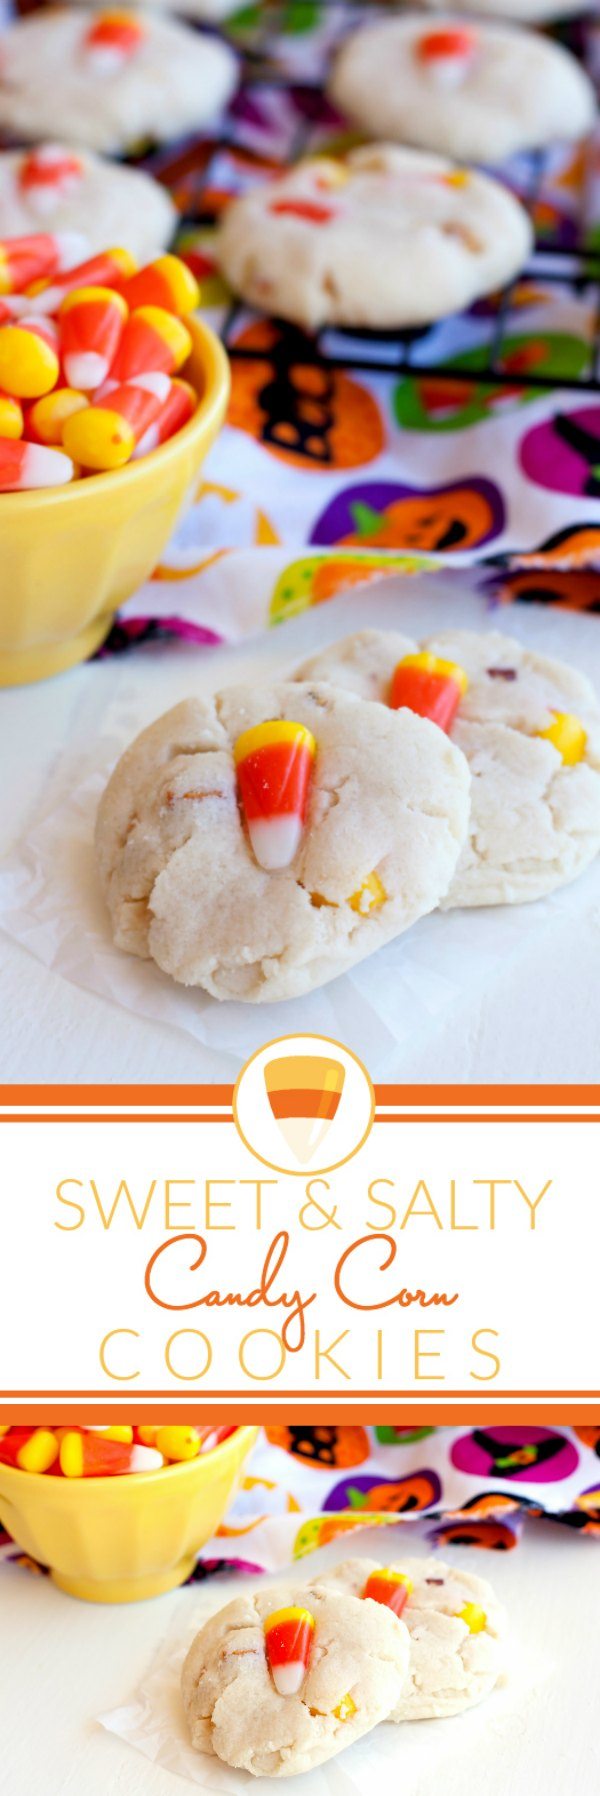 Sweet and Salty Candy Corn cookies with text overlay for Social Media